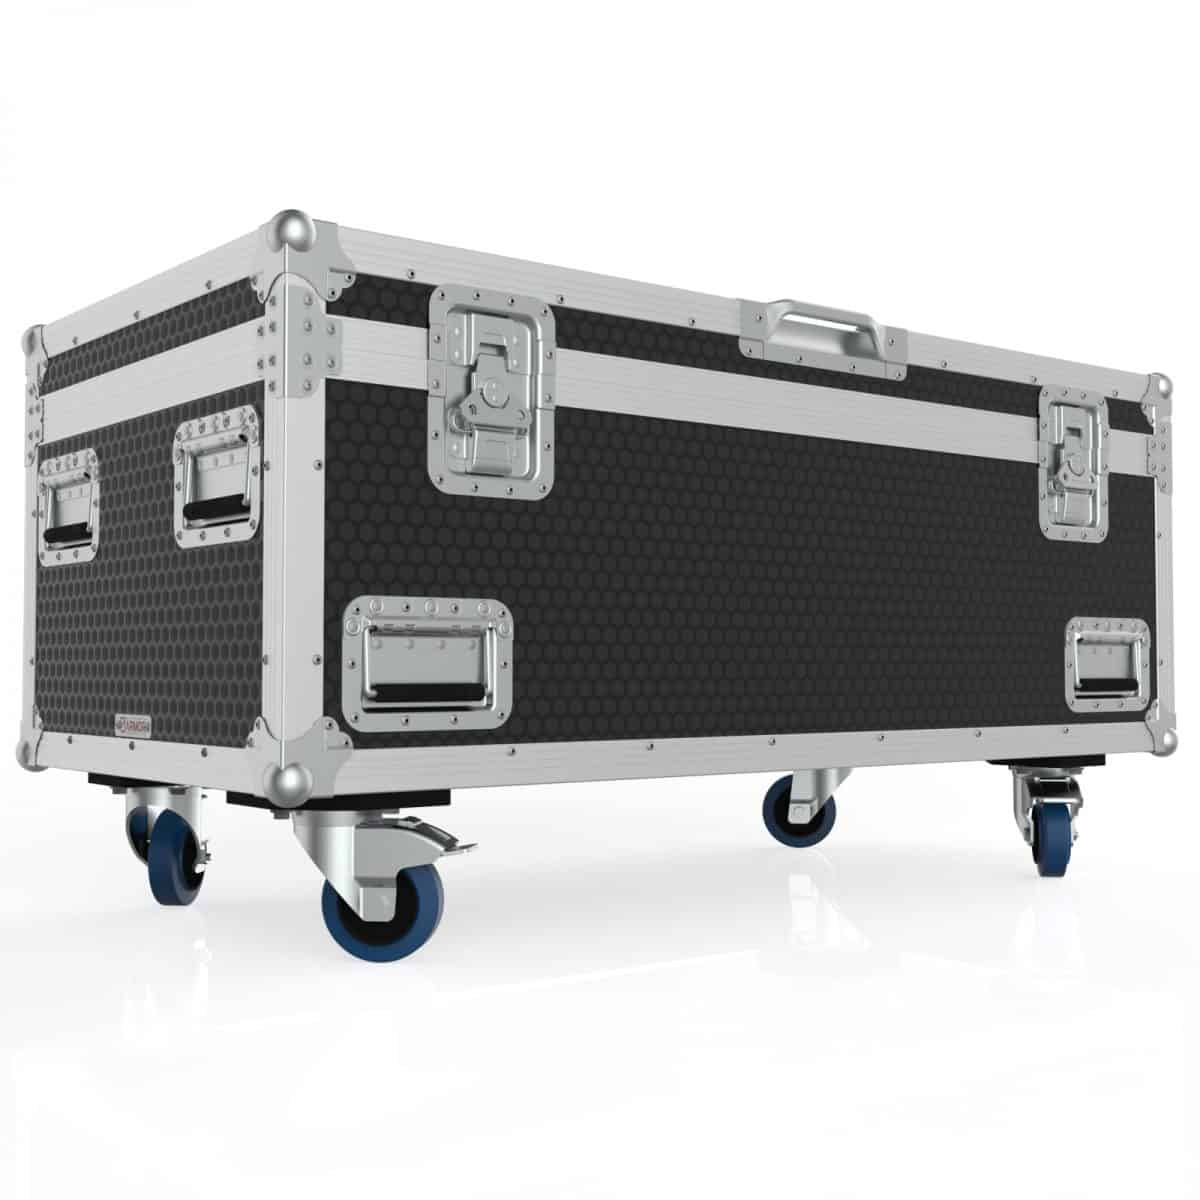 ARMOR CP1200S-S1500 Cable Packer Utility Trunk Road Case